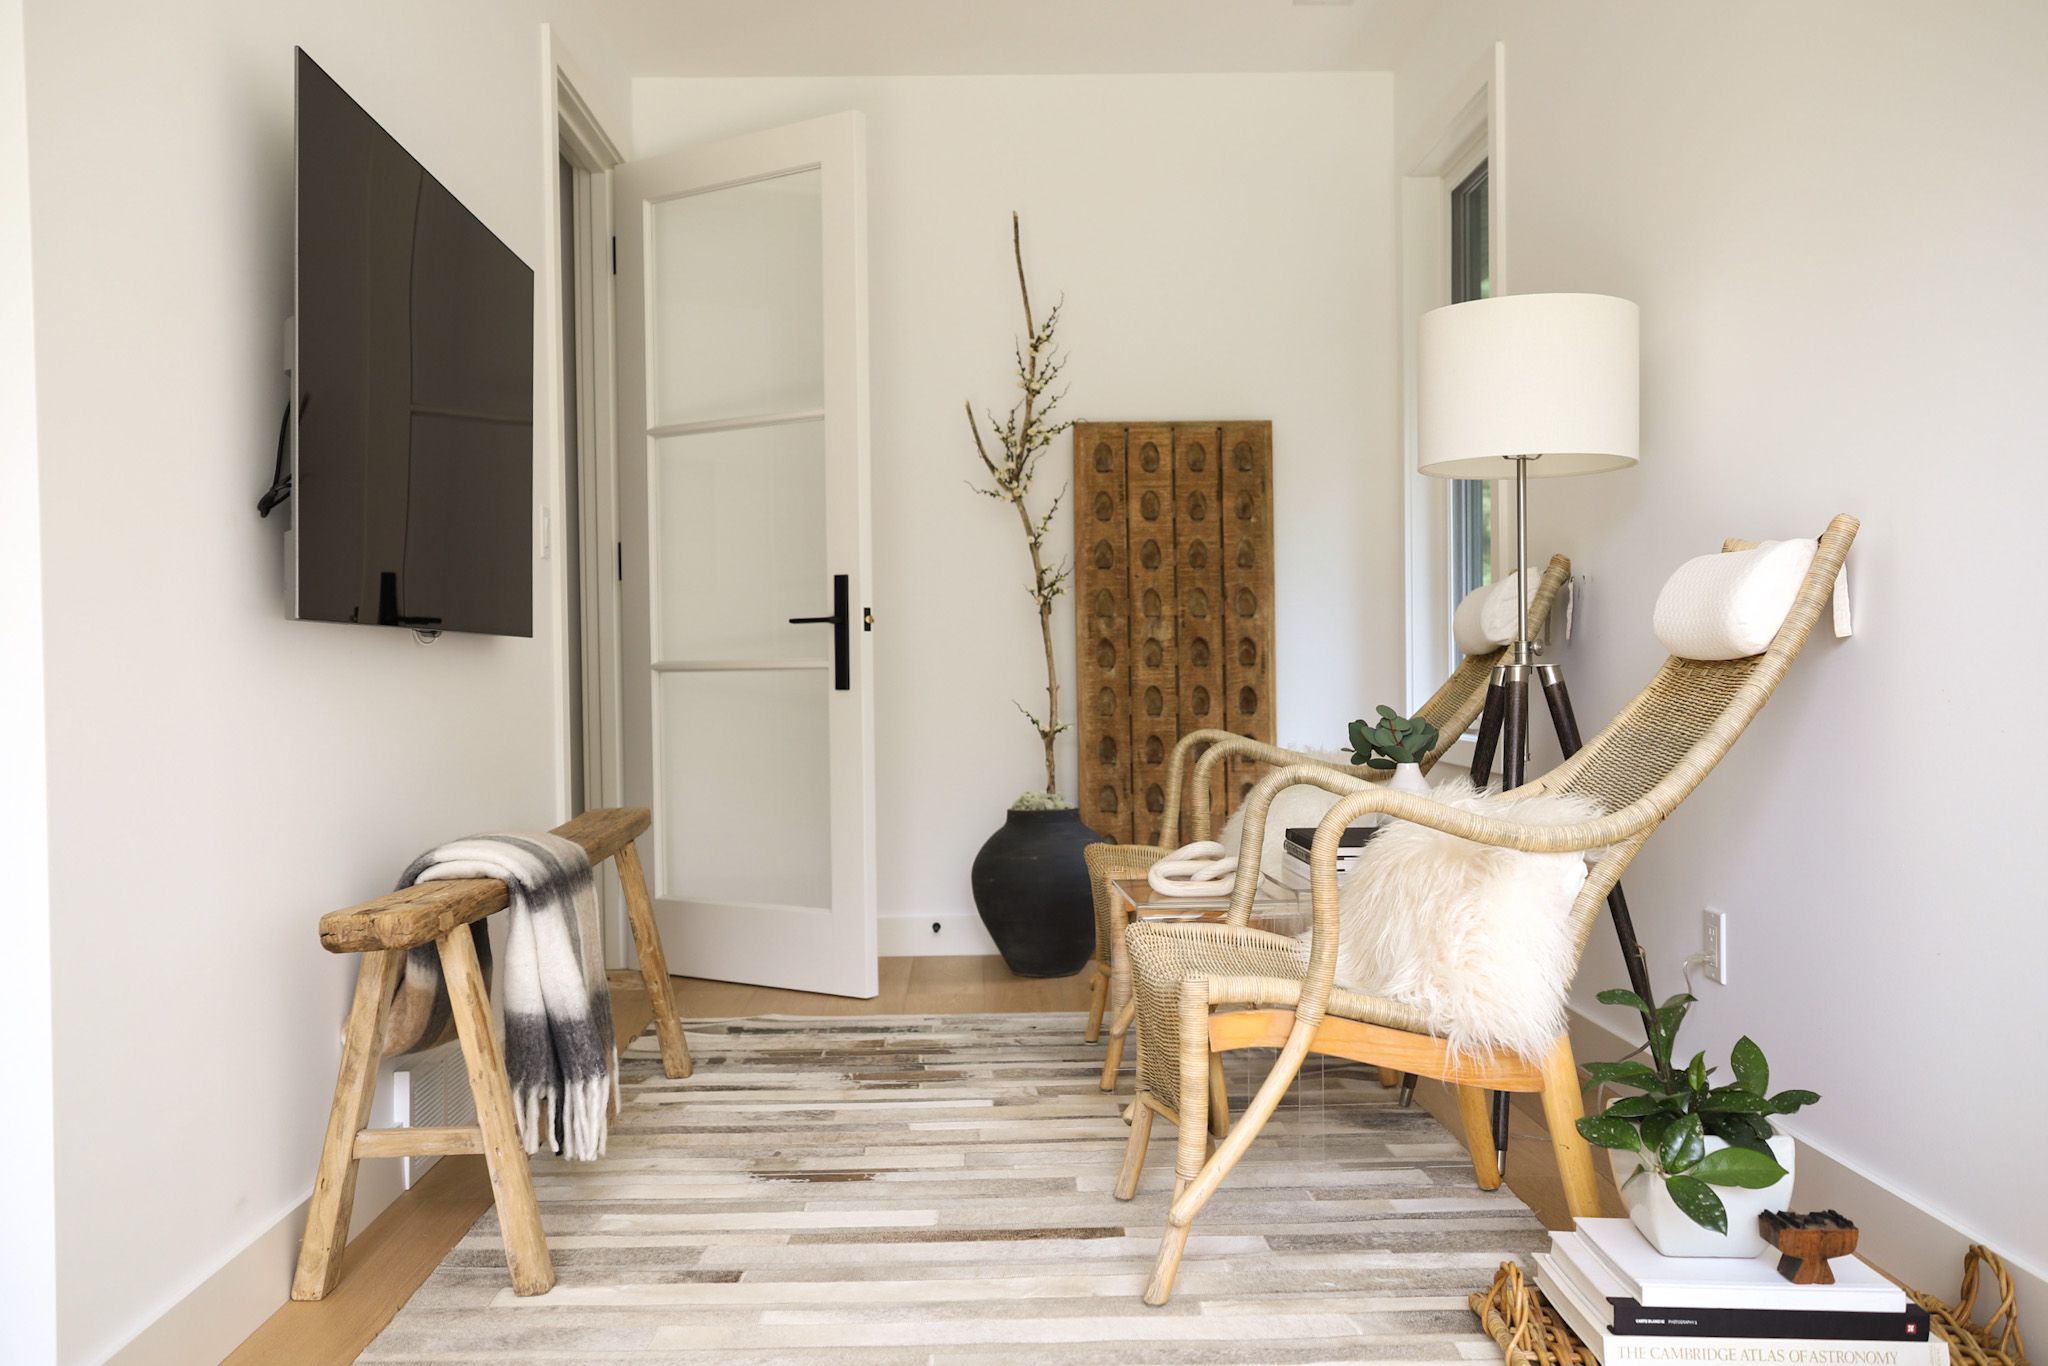 The Easiest Tricks to Make a Small Room Look Bigger